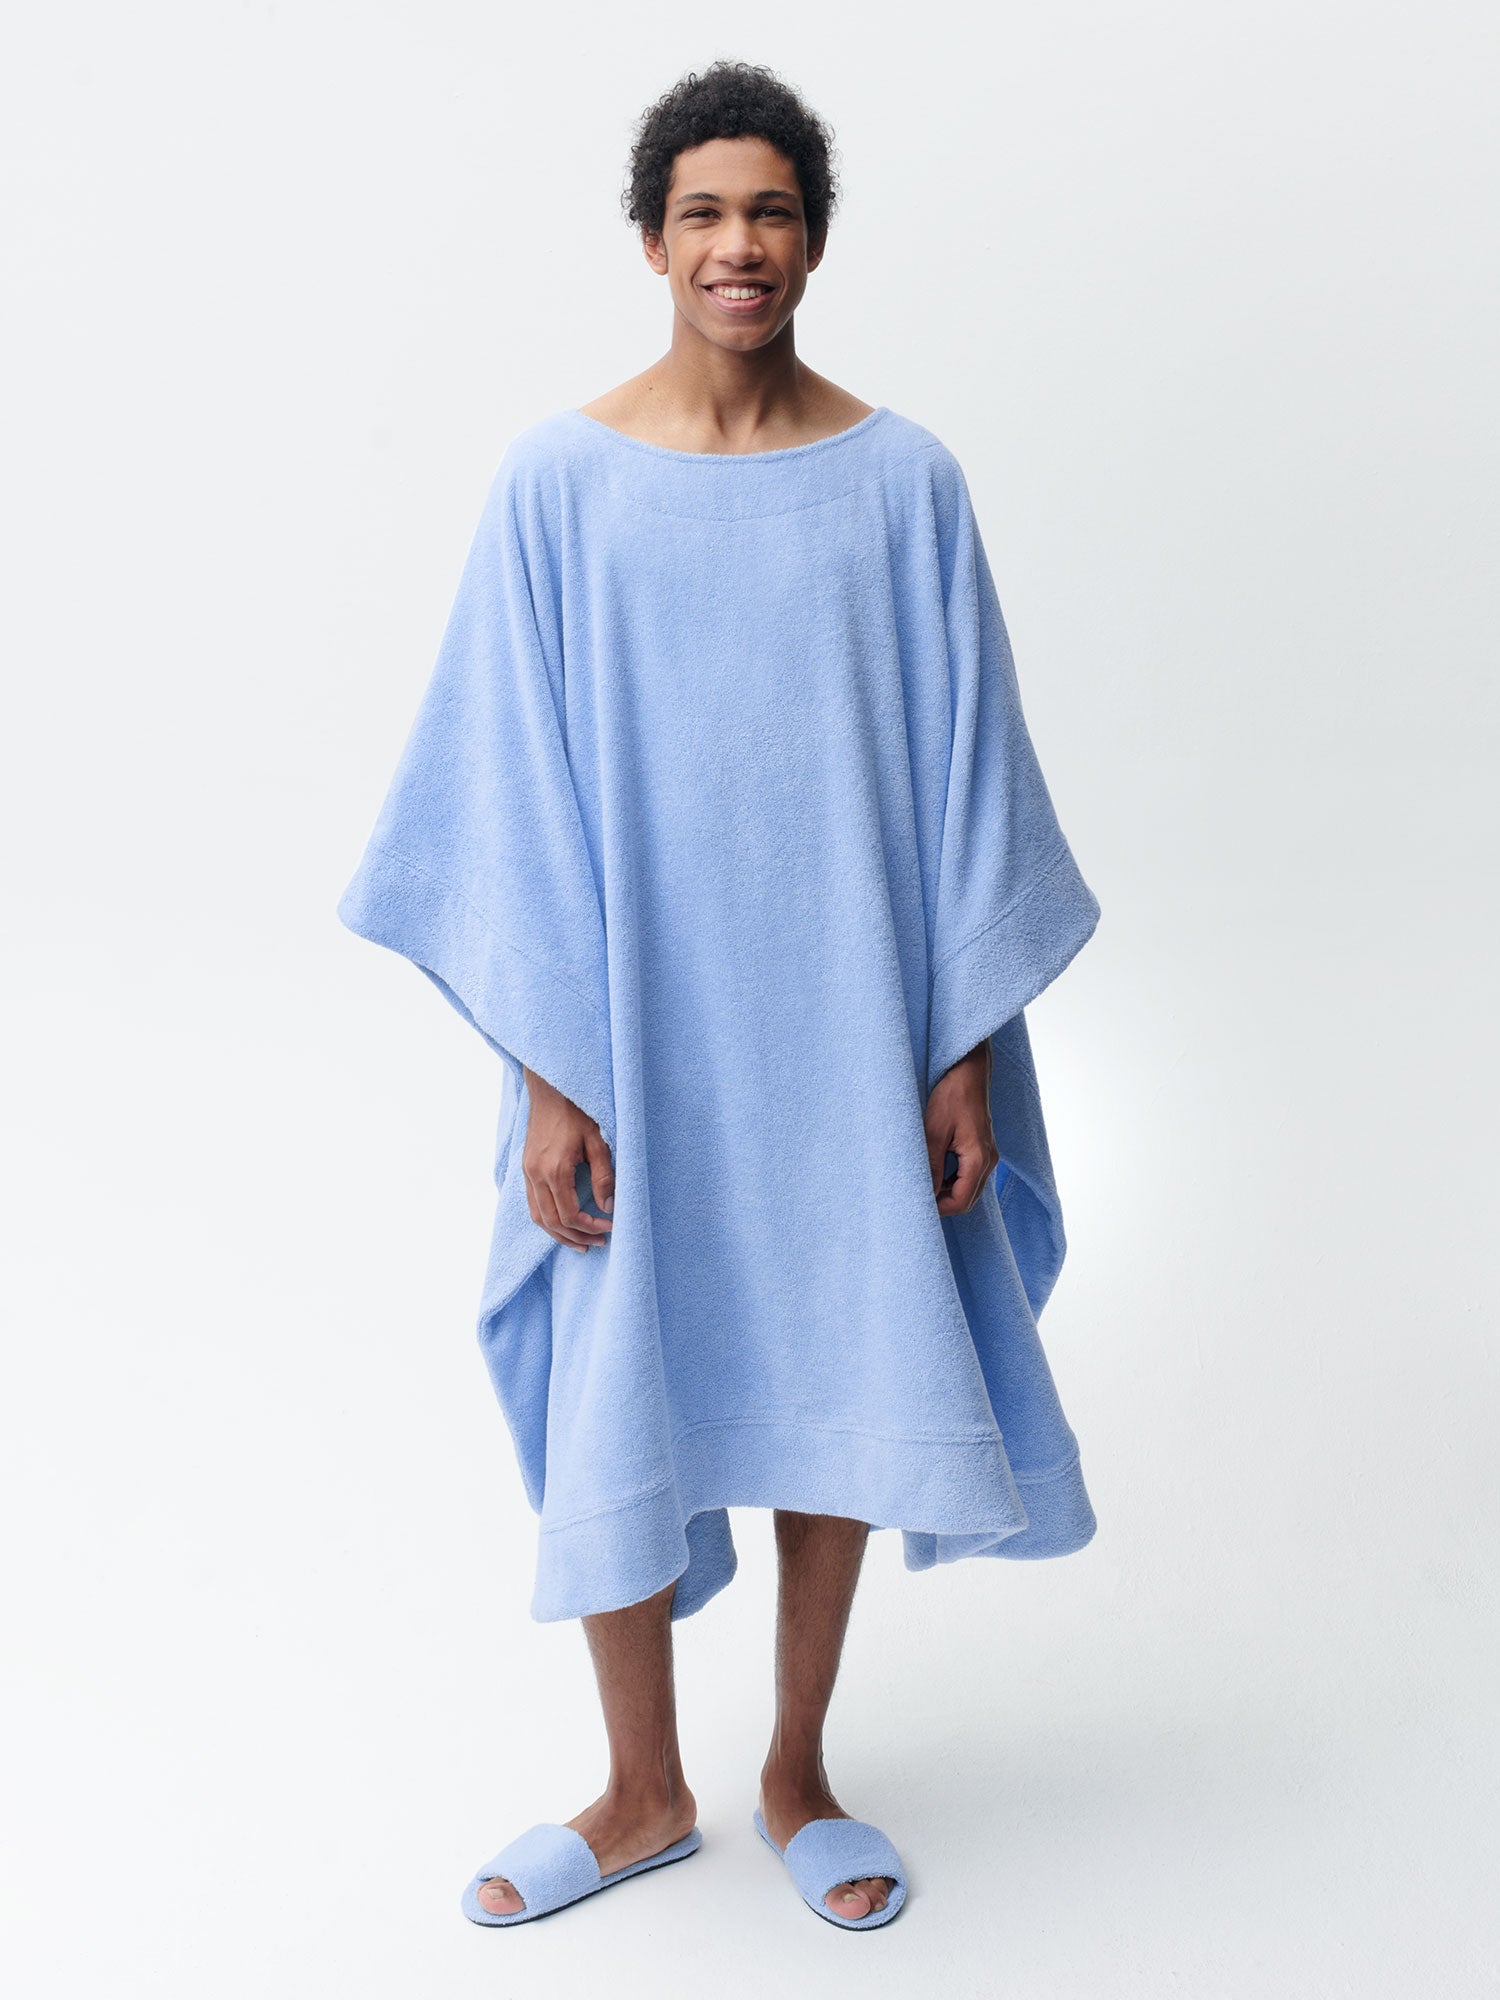 Robert-Rabensteiner-Towelling-Poncho-French-Riviera-Blue-Male-1